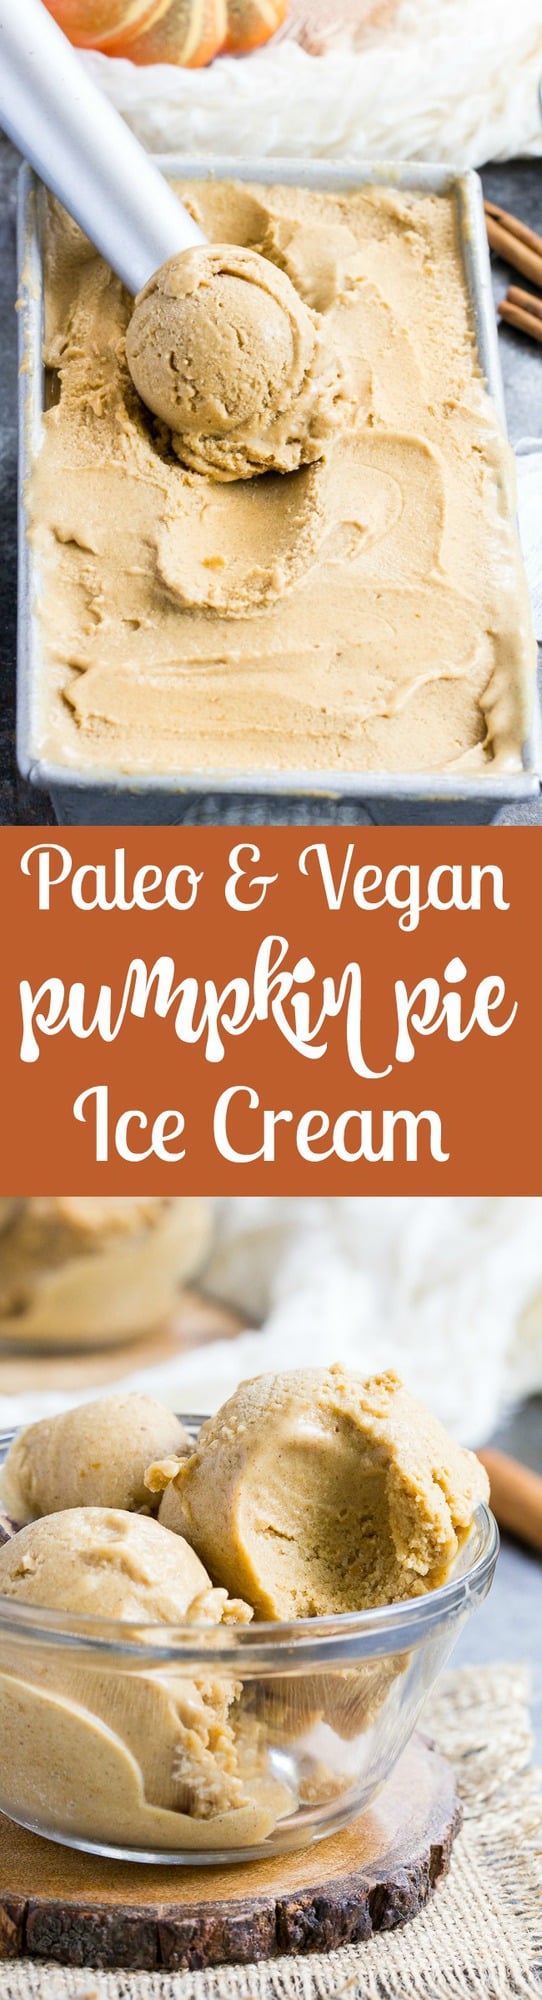 This Pumpkin Pie Paleo & Vegan Ice Cream is the perfect healthy pumpkin treat to make when you start craving all the sweet flavors of fall!  It's creamy, sweet and perfectly spiced - just like a pumpkin pie in ice cream form.  My kids can't get enough!  Paleo, dairy-free, vegan, egg free and easy to make. 